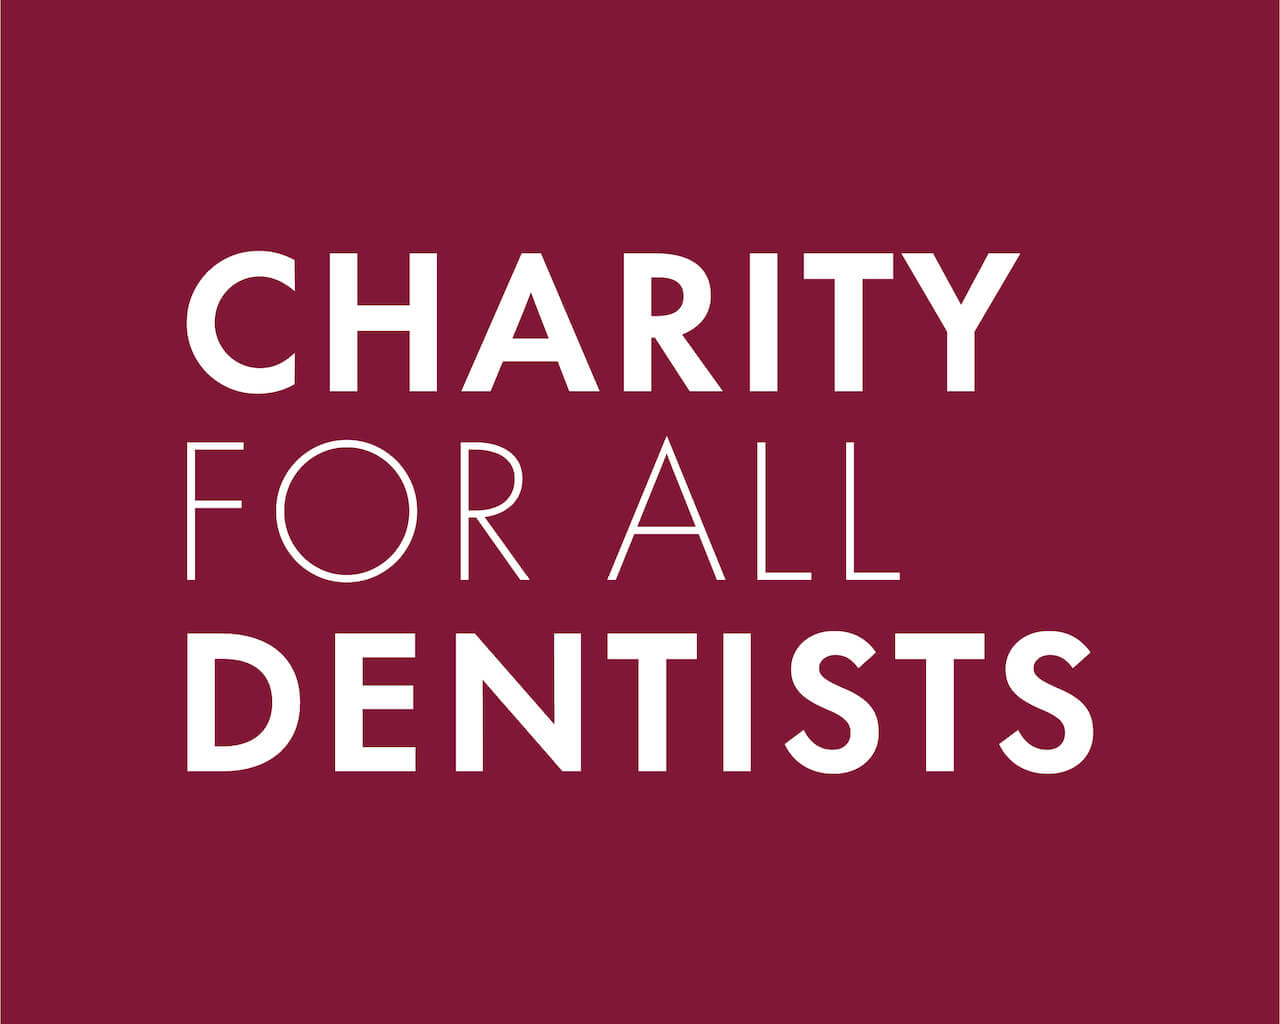 Charity for all dentists logo